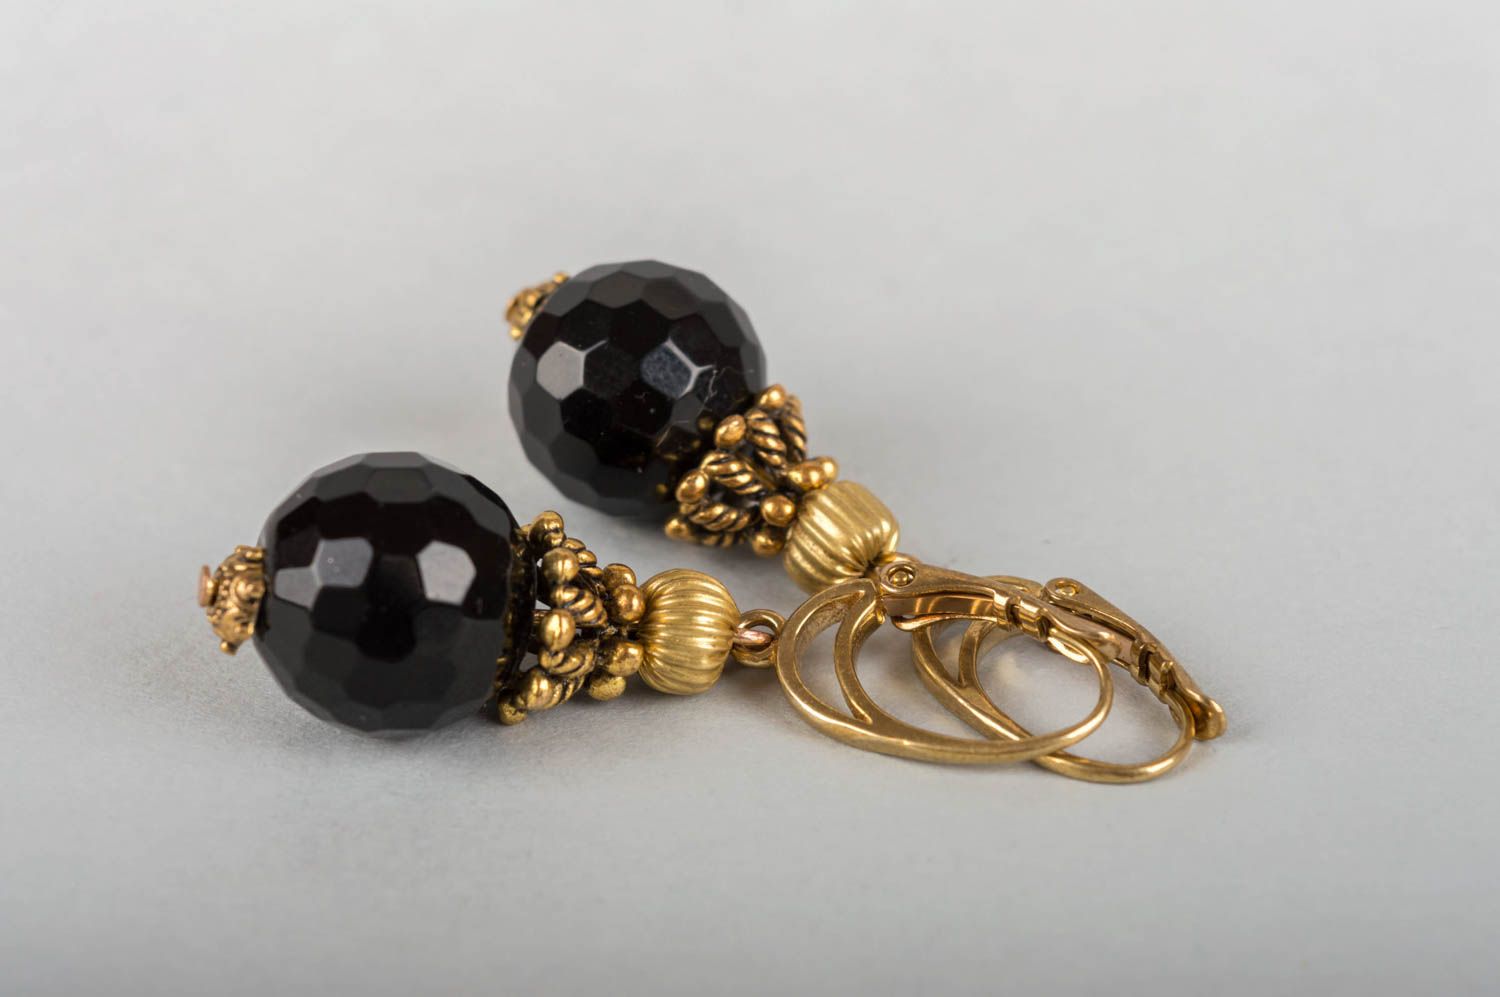 Handmade stylish earrings made of natural stone agate and brass fittings photo 5